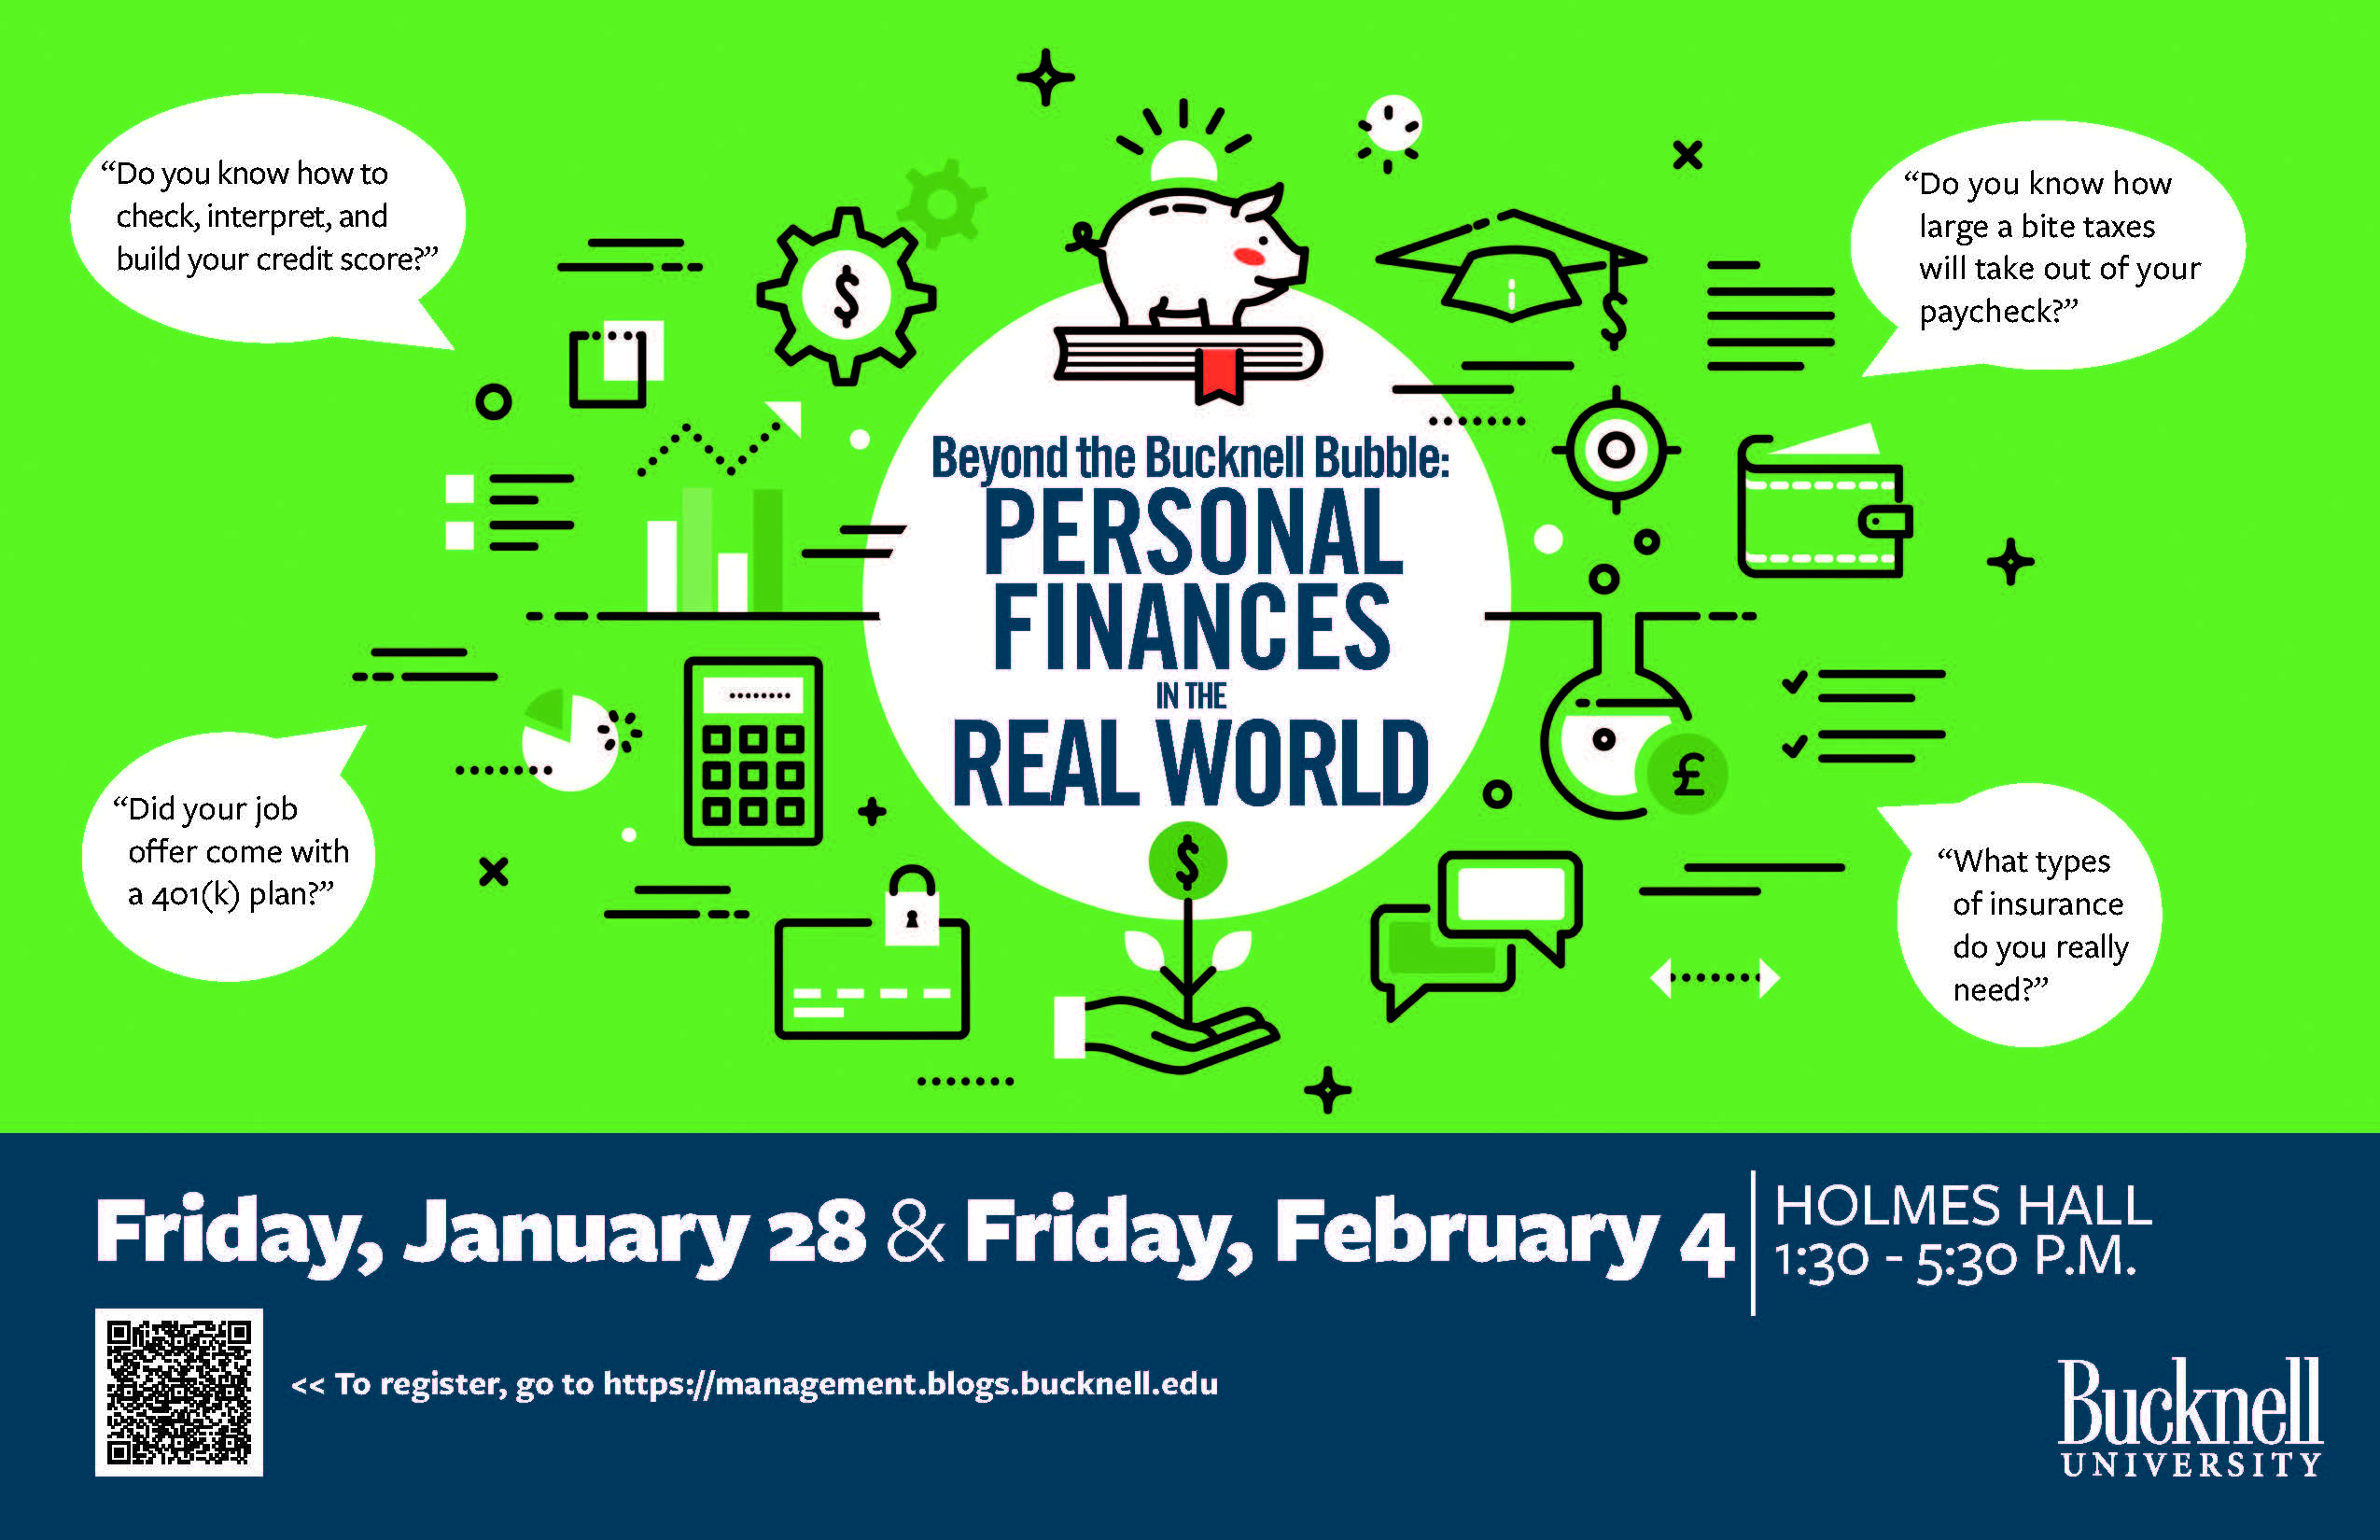 Register NOW: Beyond the Bucknell Bubble Personal Finance Seminar Jan 28 and Feb 4, 2022